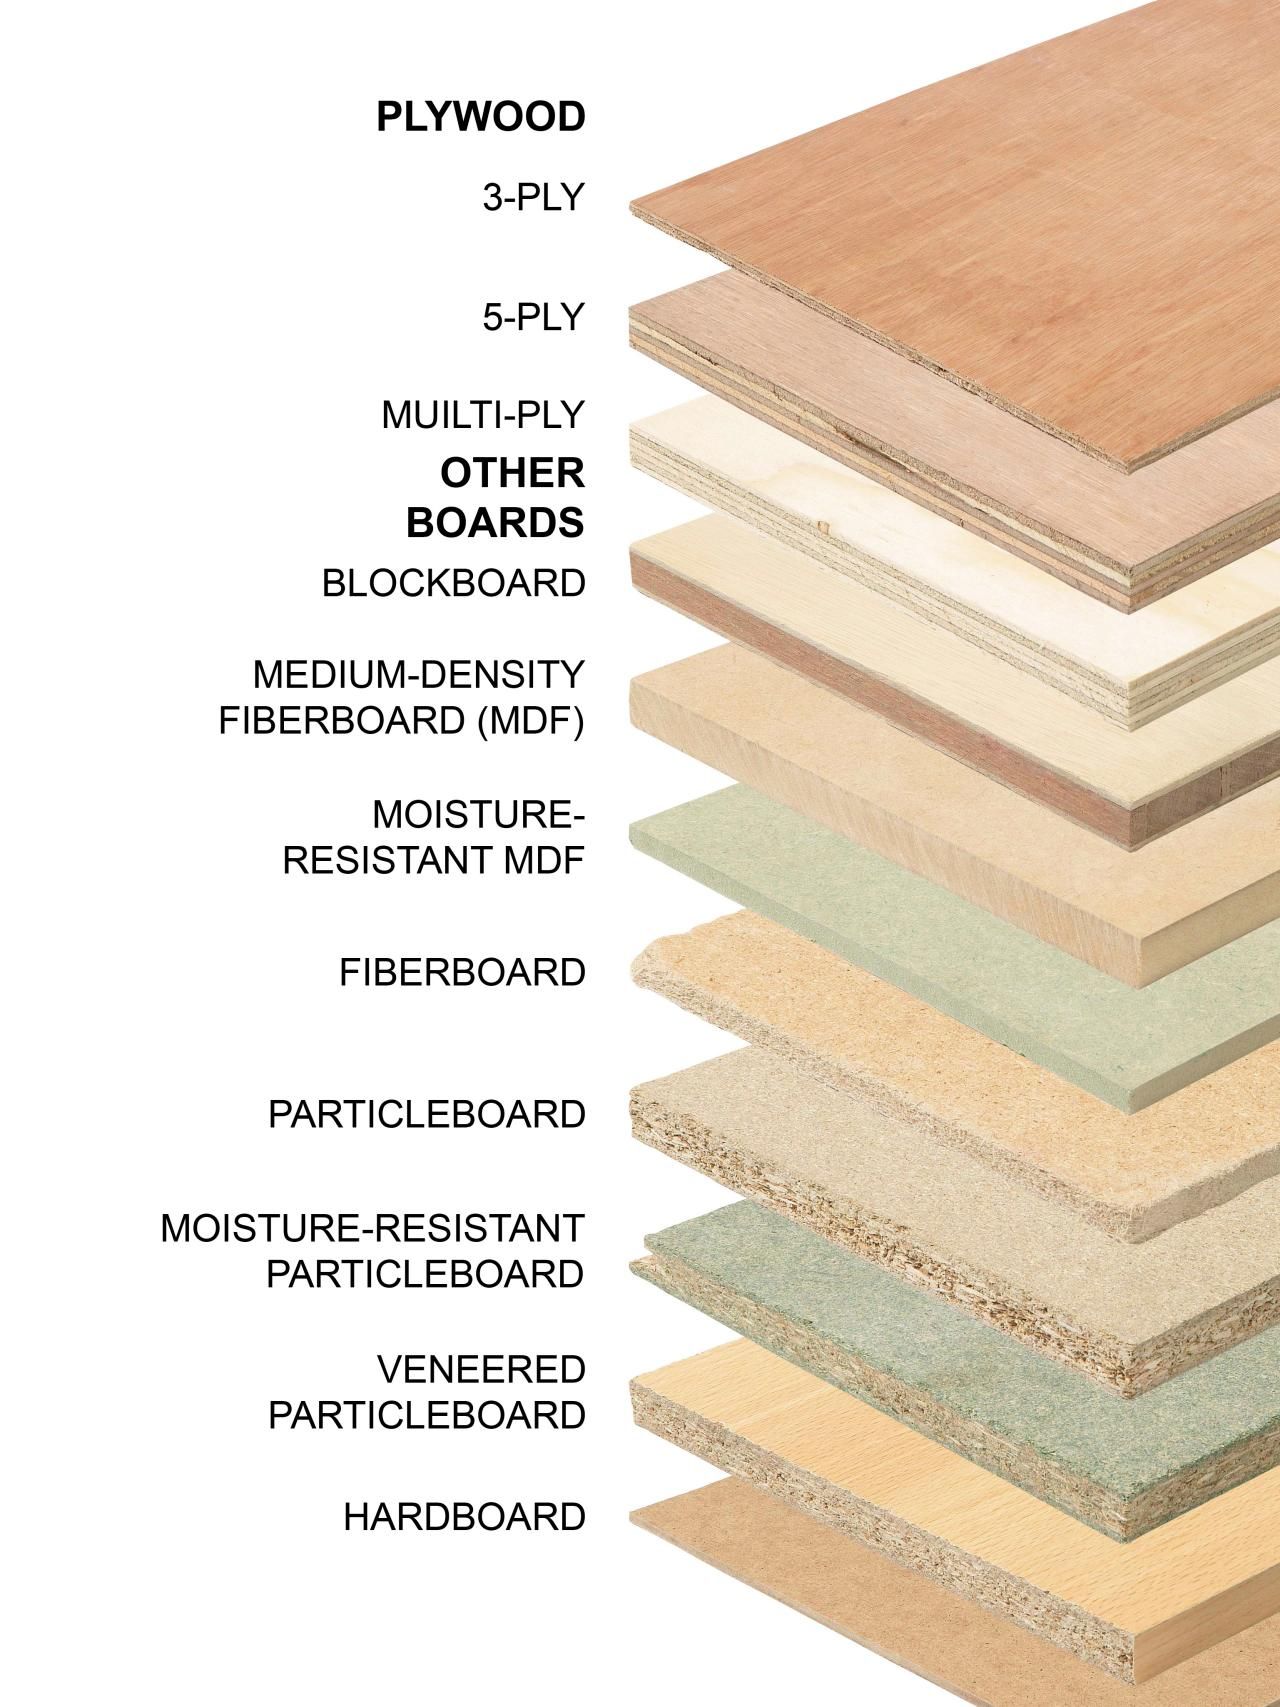 Furniture Materials And Their Durability Explained